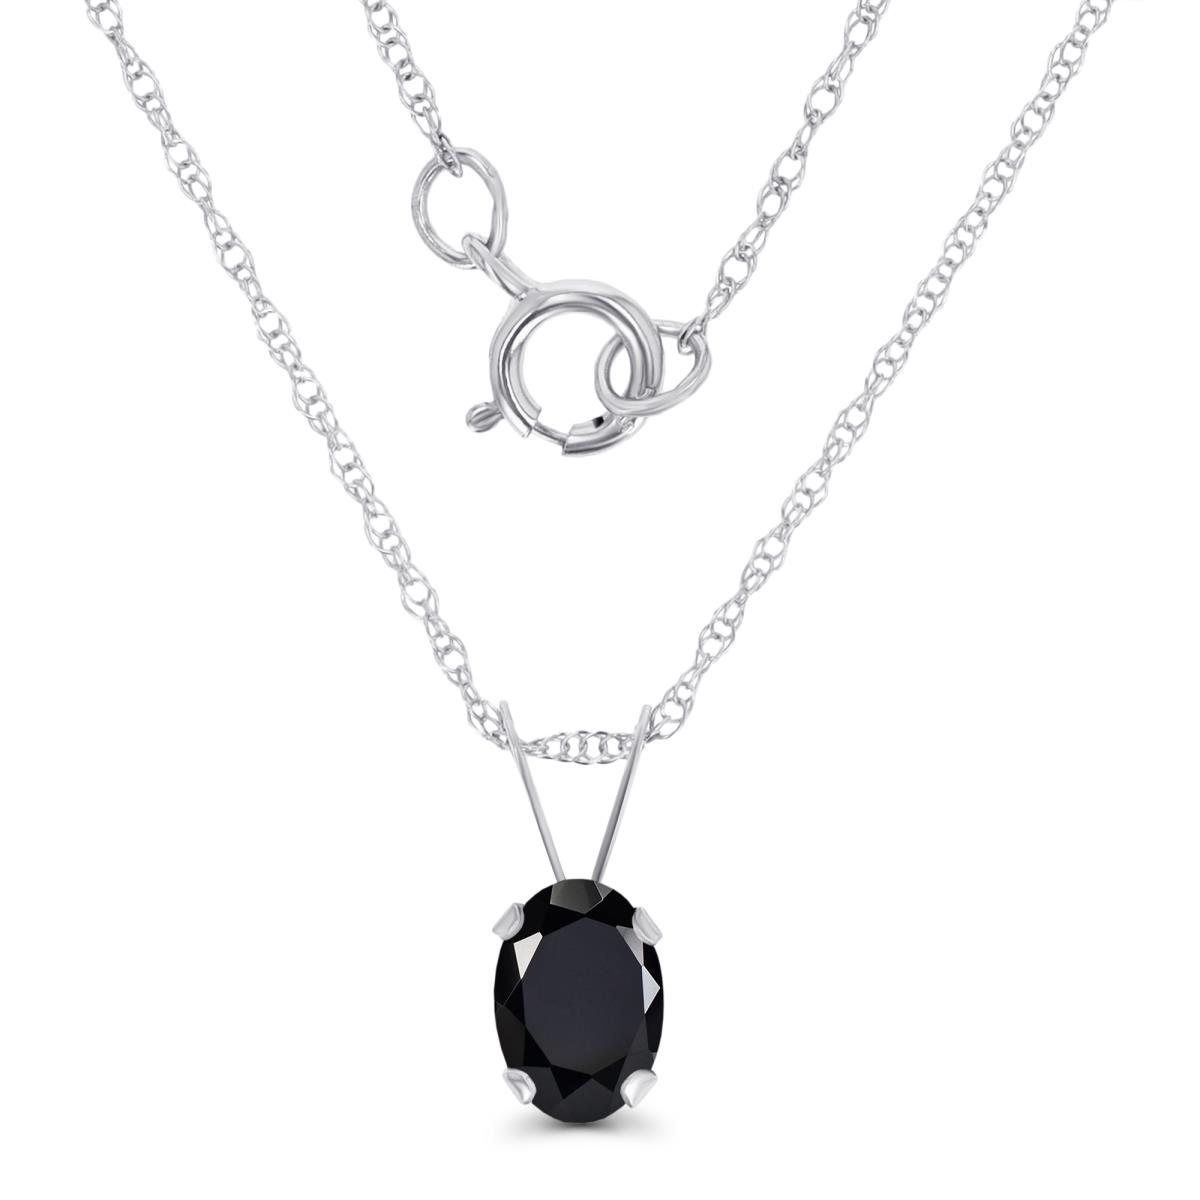 10K White Gold 6x4mm Oval Onyx 18" Rope Chain Necklace